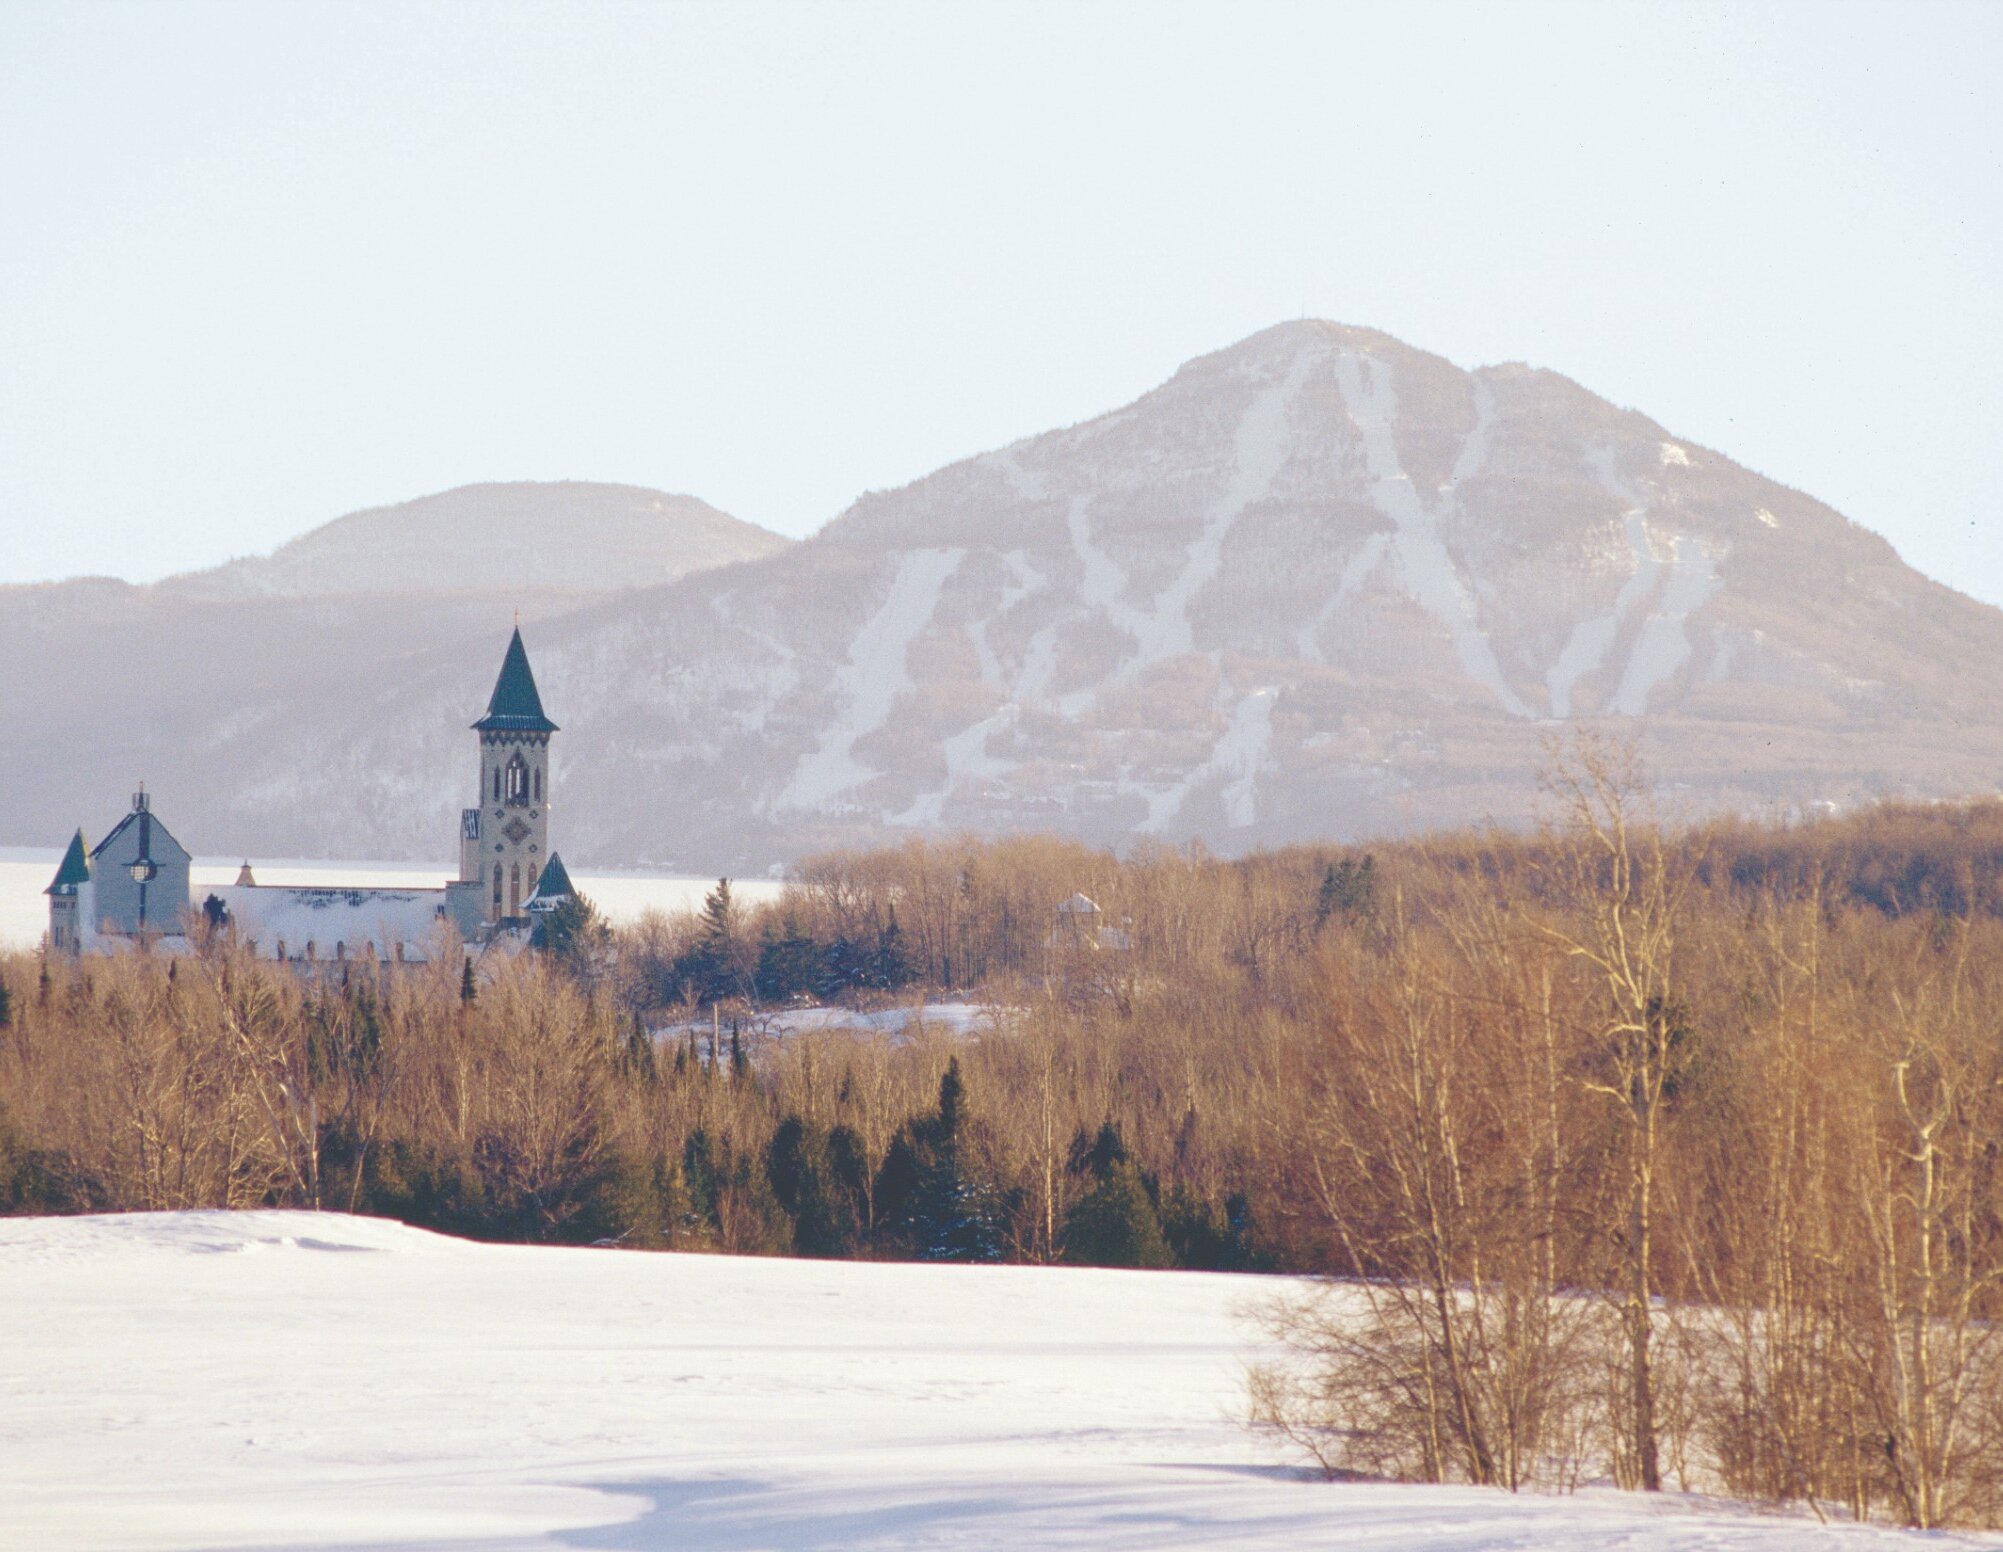 View of a ski area in the Eastern Townships